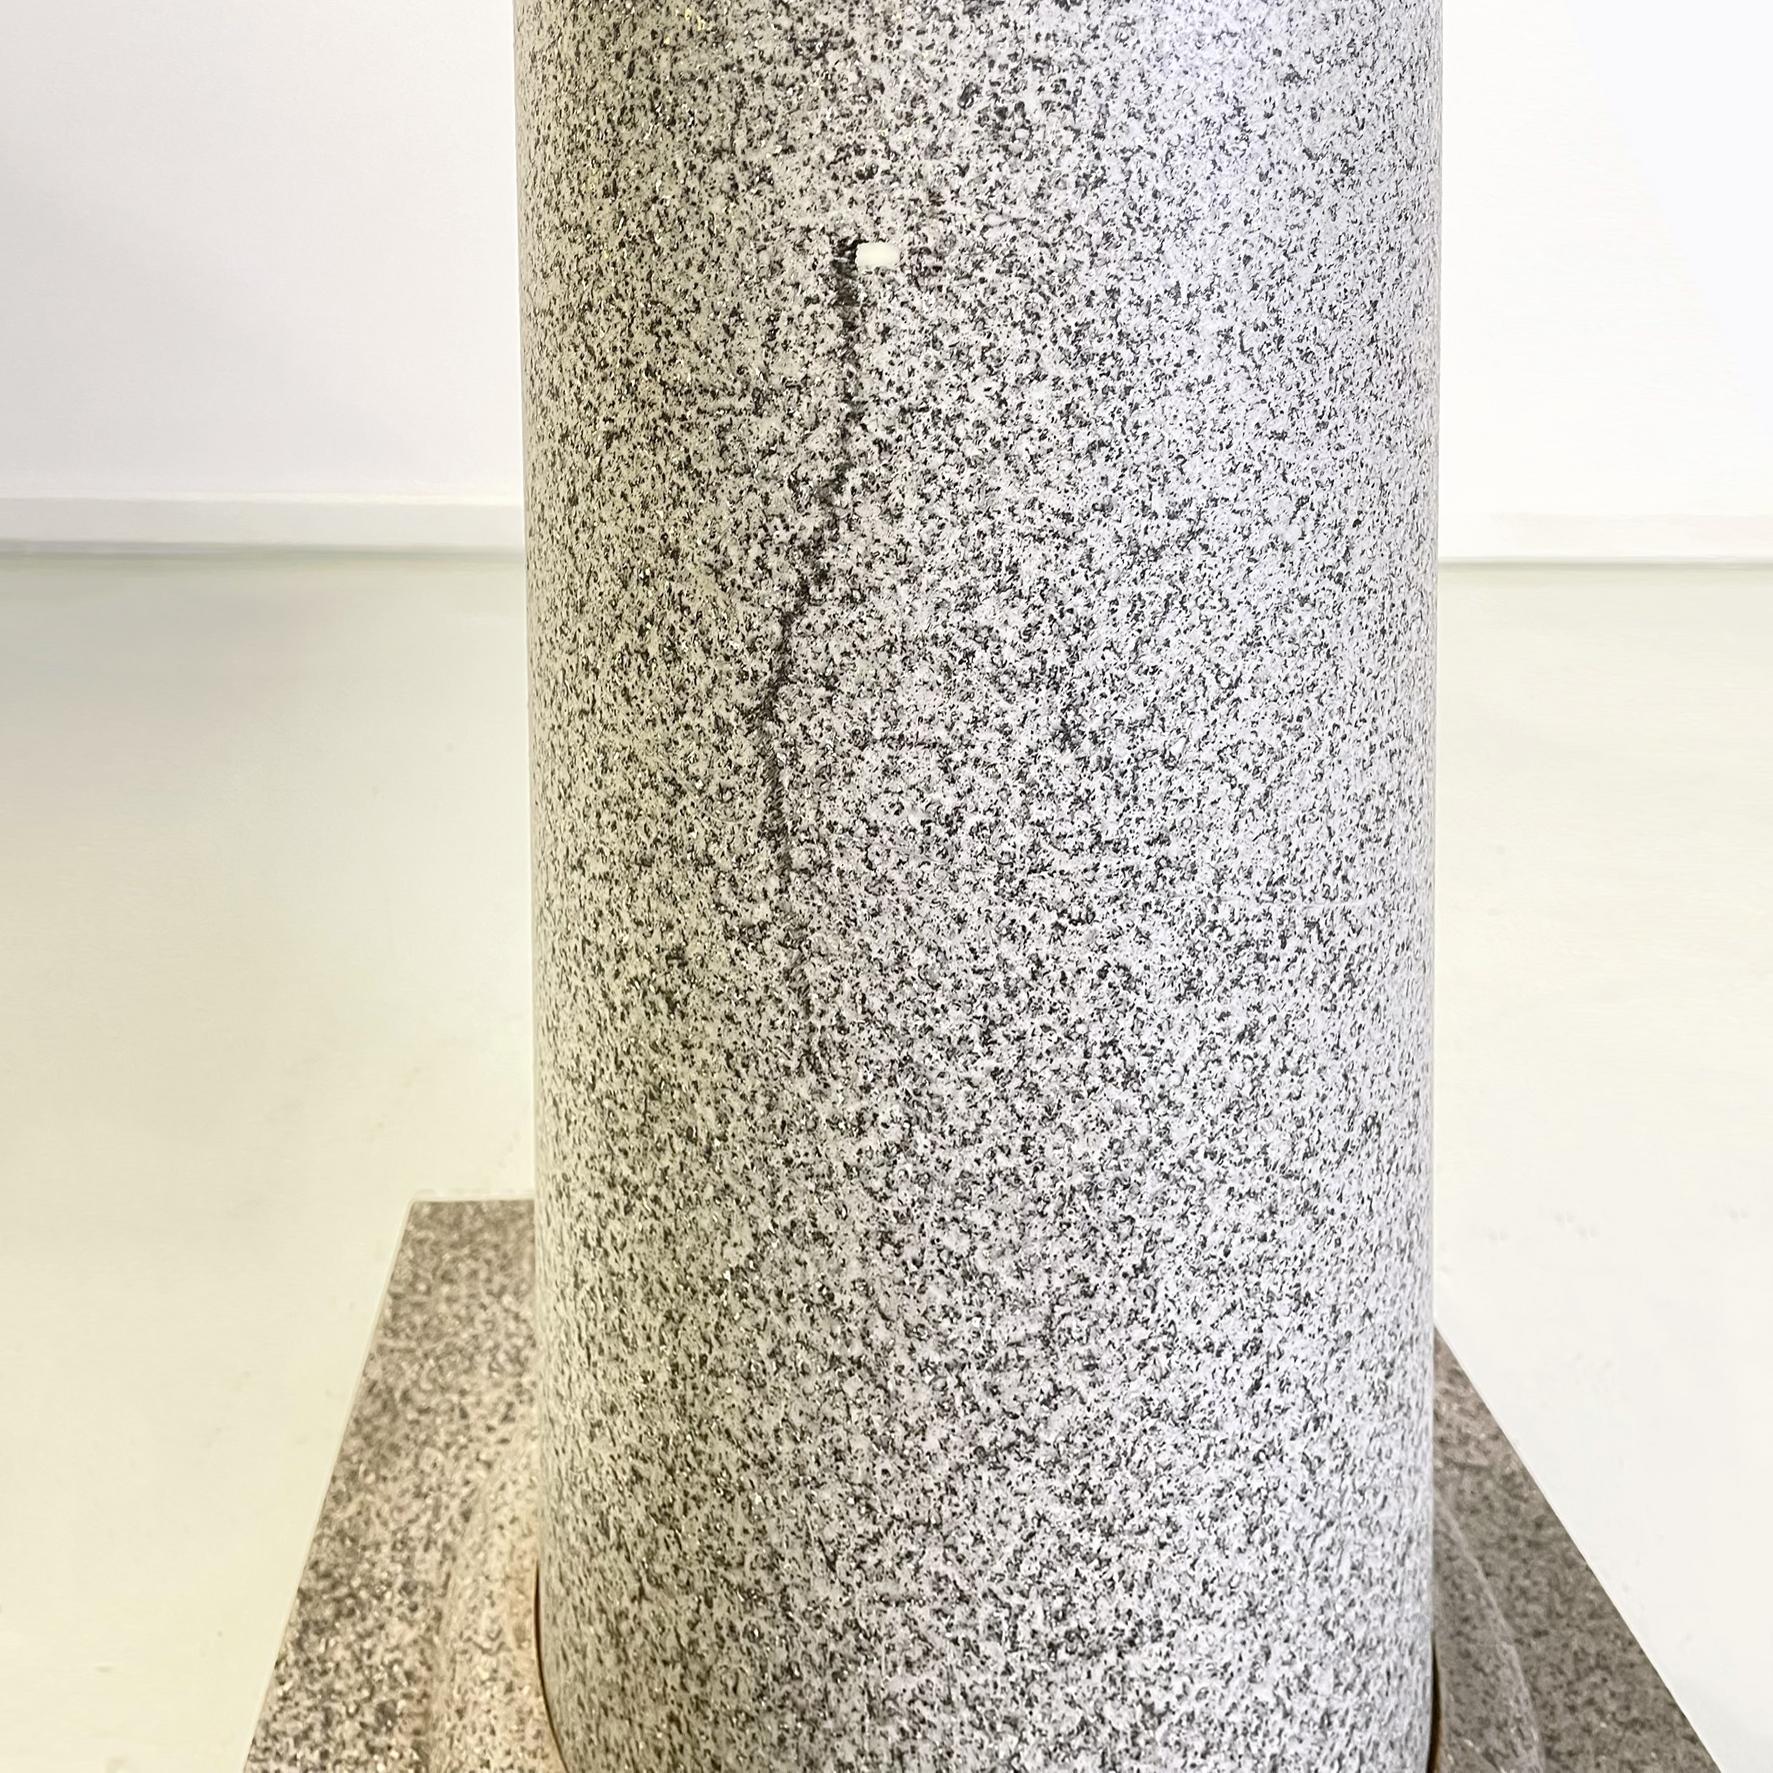 Italian Modern Pedestal Column in Wood Painted as Stone, 1990s-2000s For Sale 3